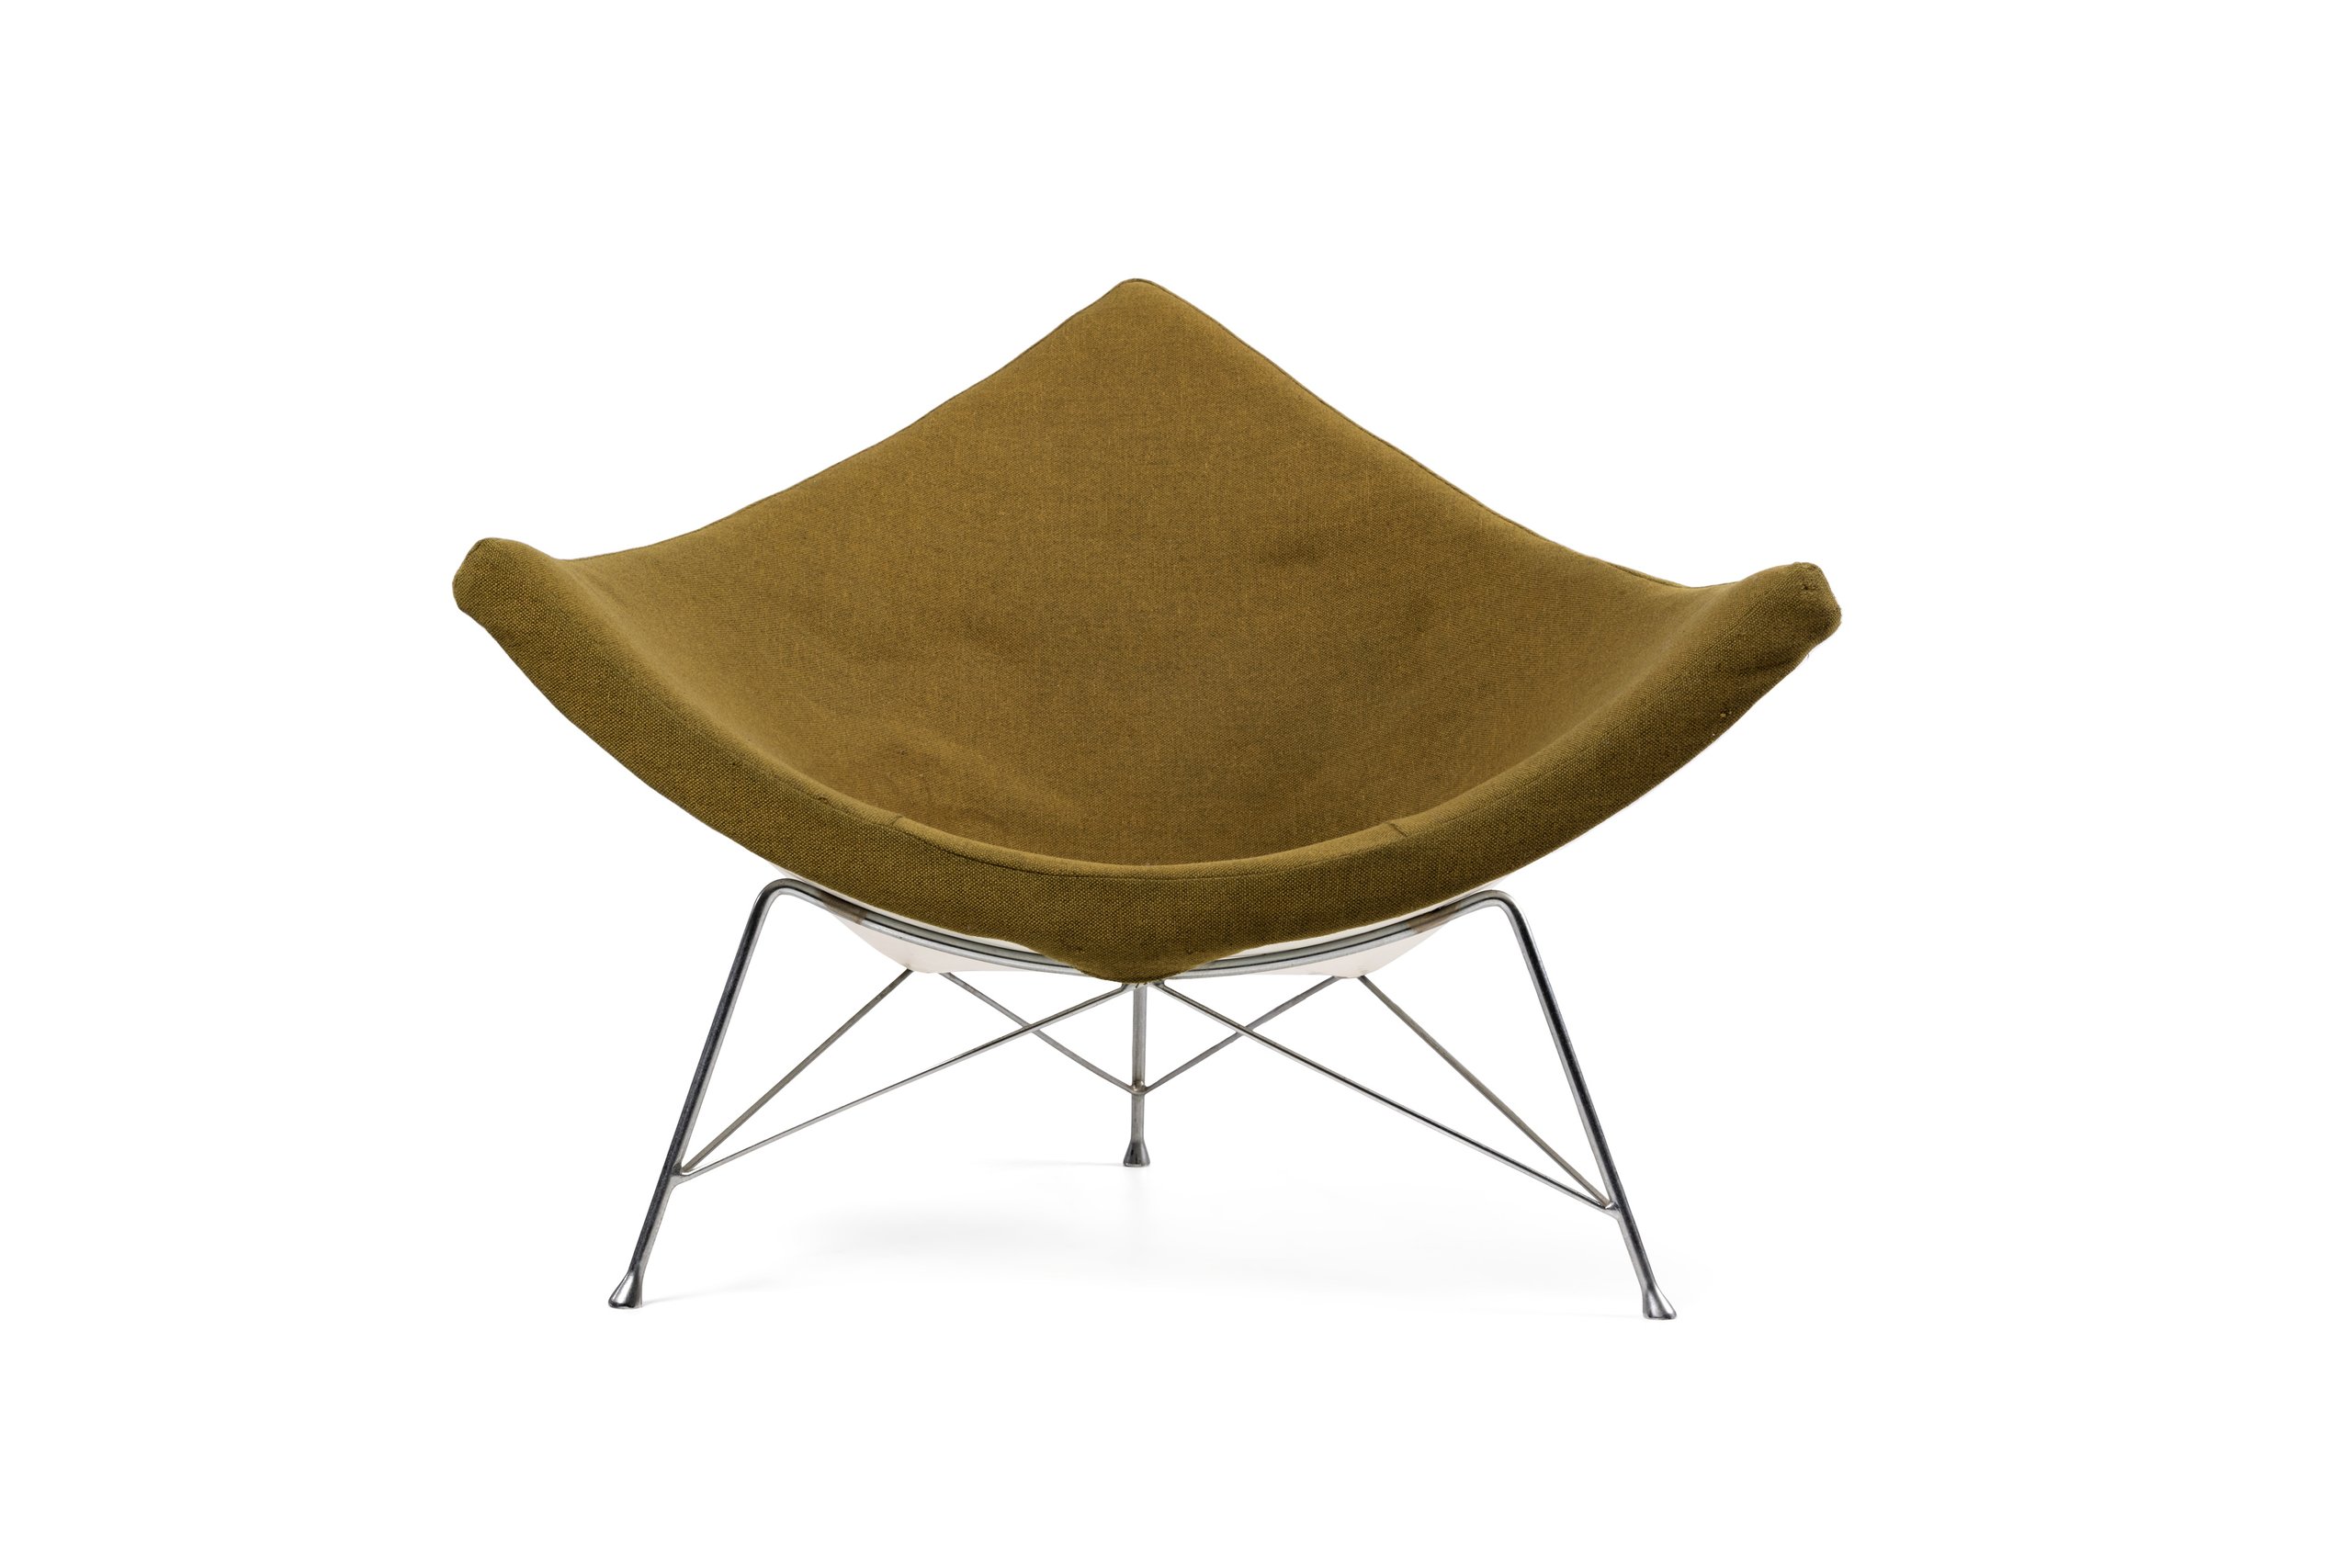 'Coconut' chair by George Nelson